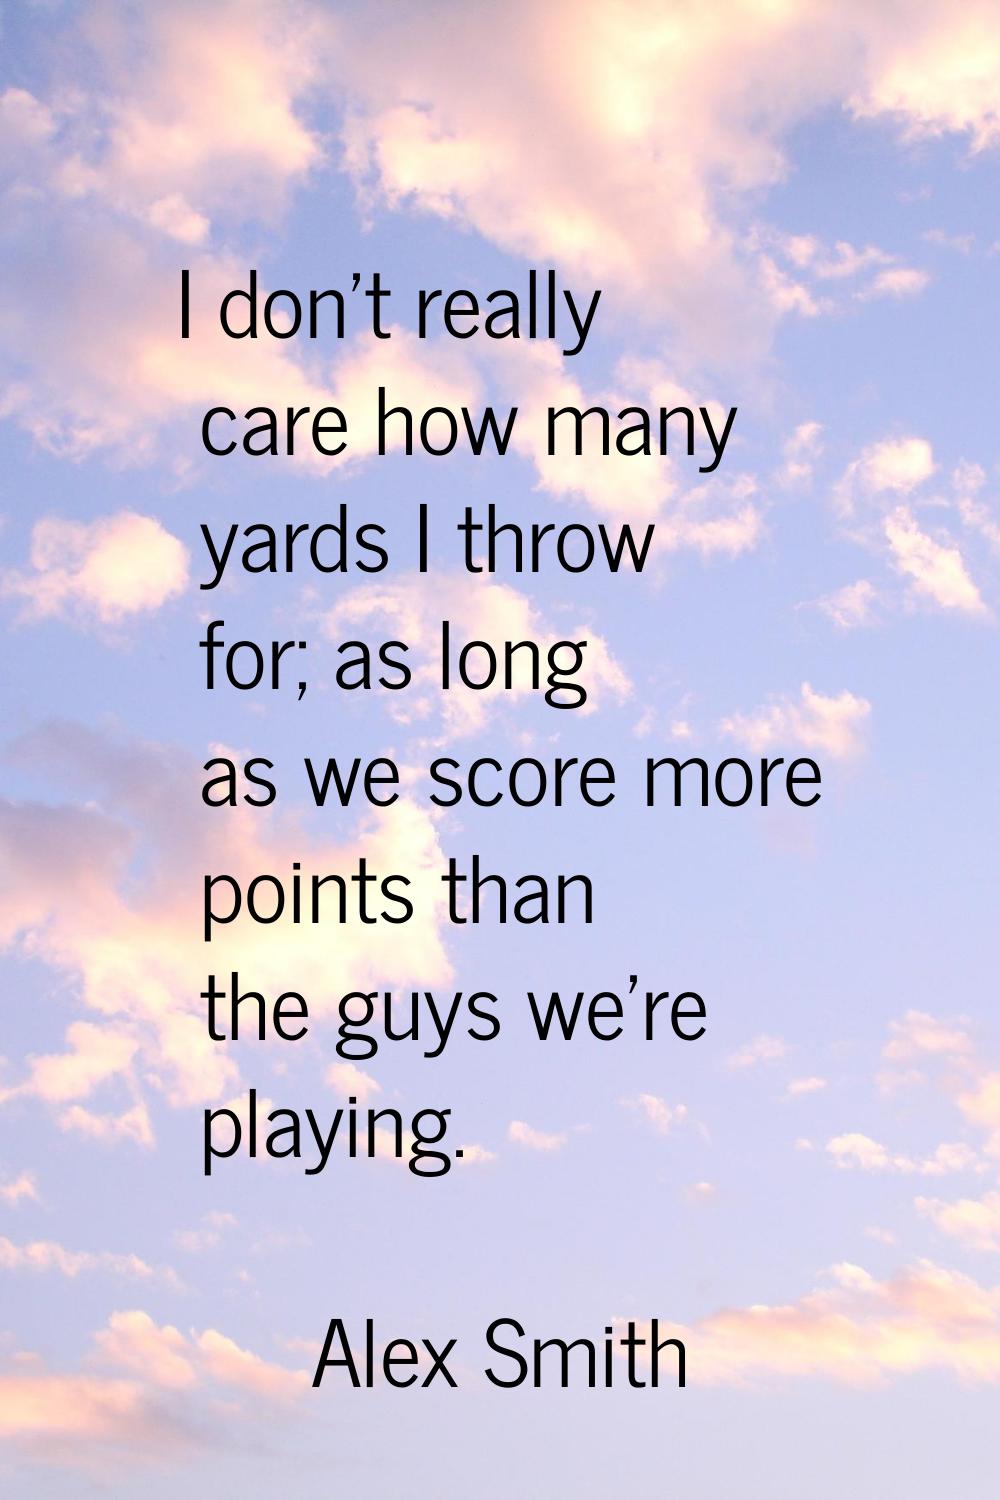 I don't really care how many yards I throw for; as long as we score more points than the guys we're